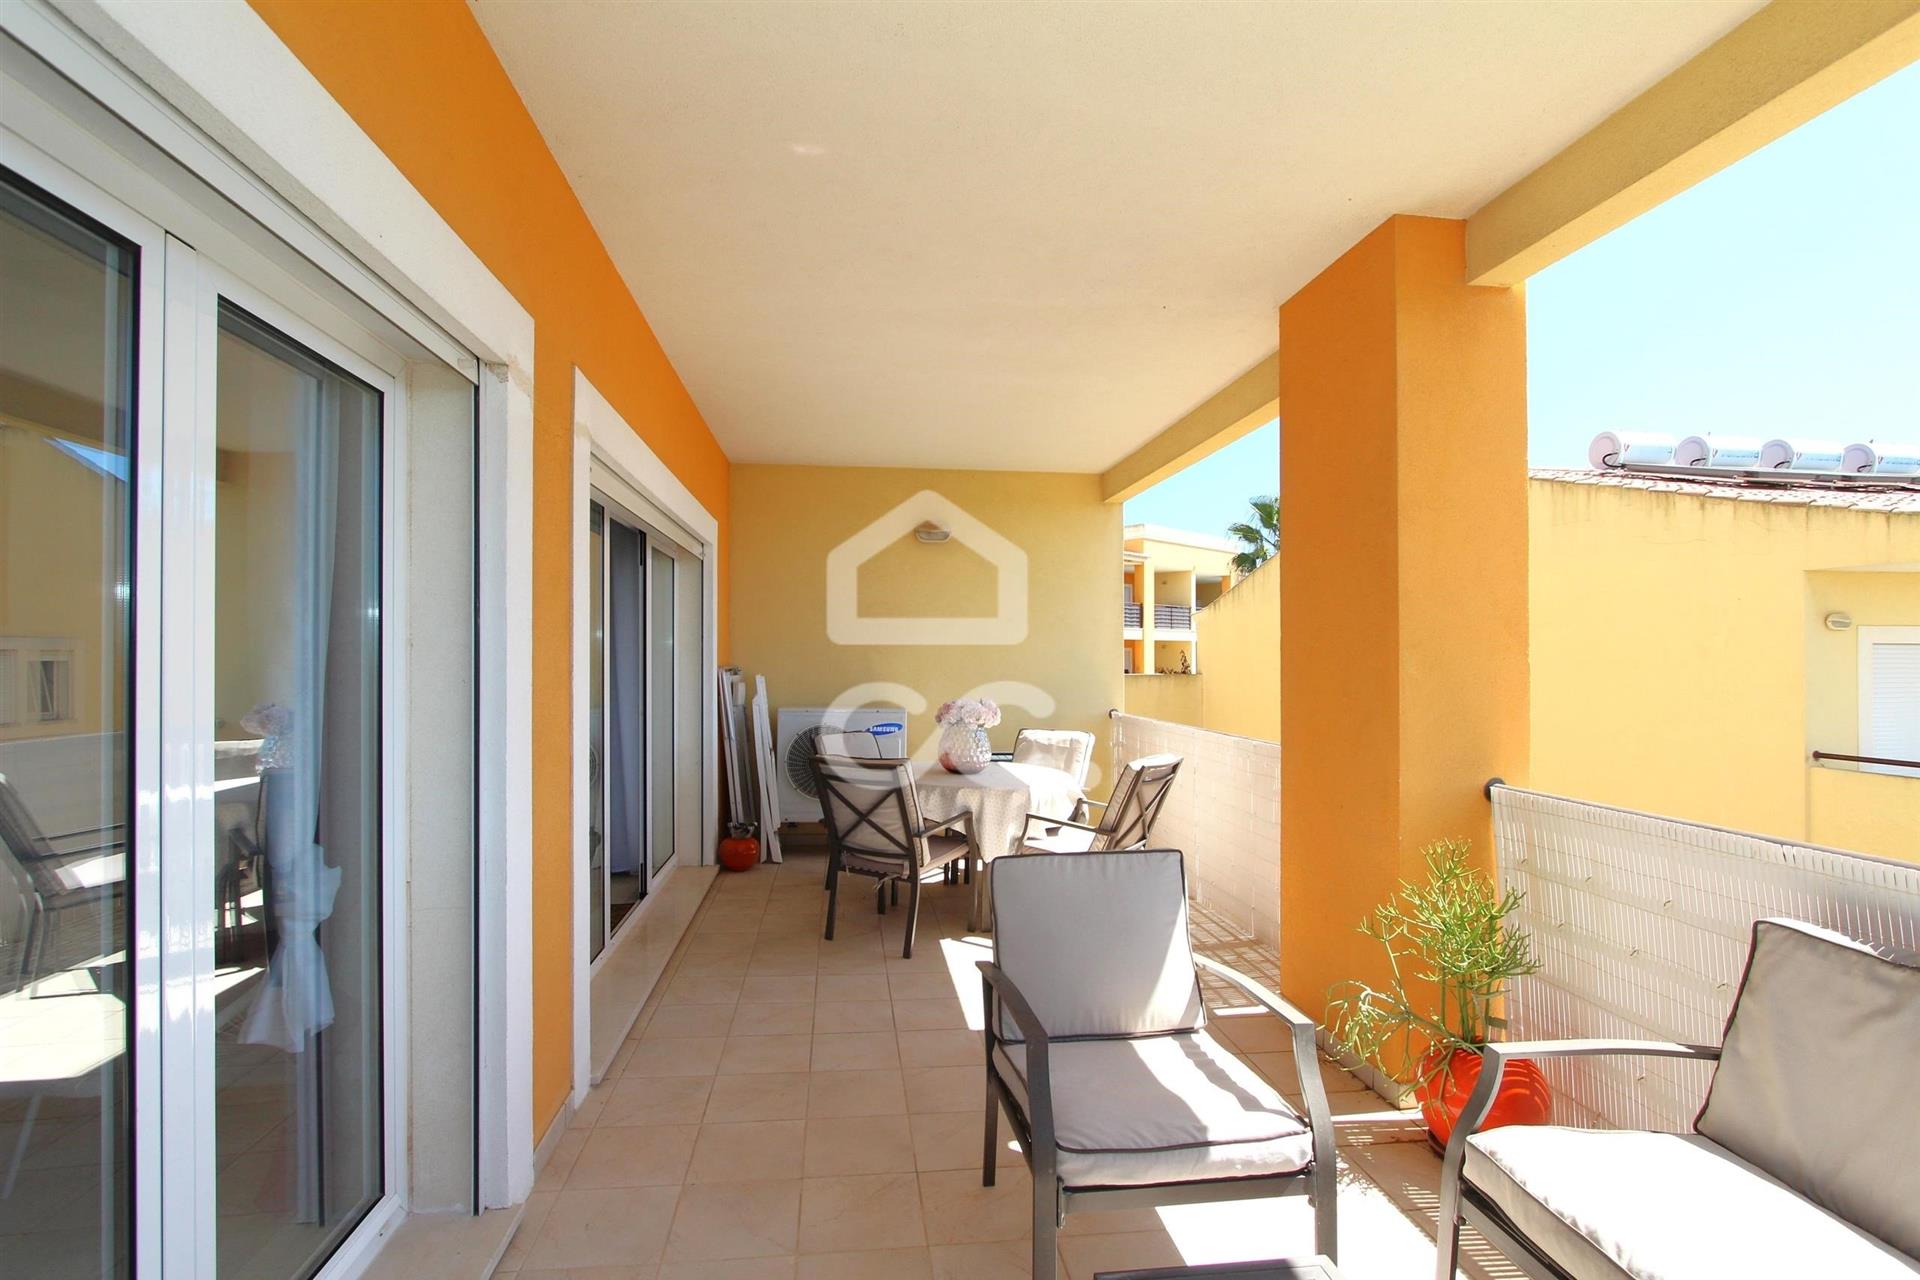 2 bedroom apartment with private terrace, in a condominium with swimming pool and garden located in 